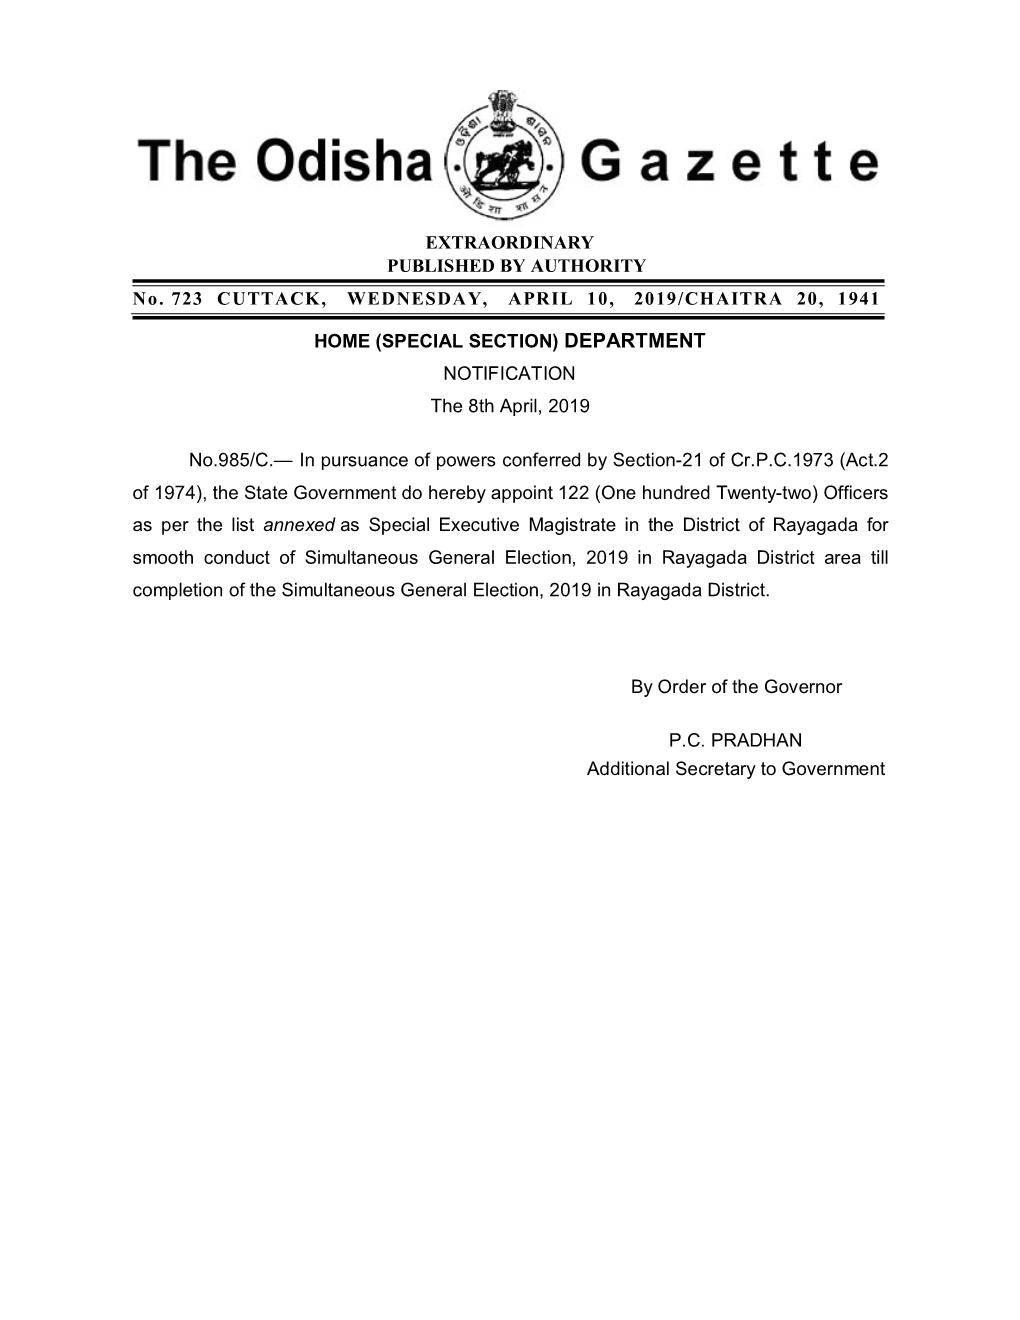 EXTRAORDINARY PUBLISHED by AUTHORITY No. 723 CUTTACK, WEDNESDAY, APRIL 10, 2019/CHAITRA 20, 1941 HOME (SPECIAL SECTION